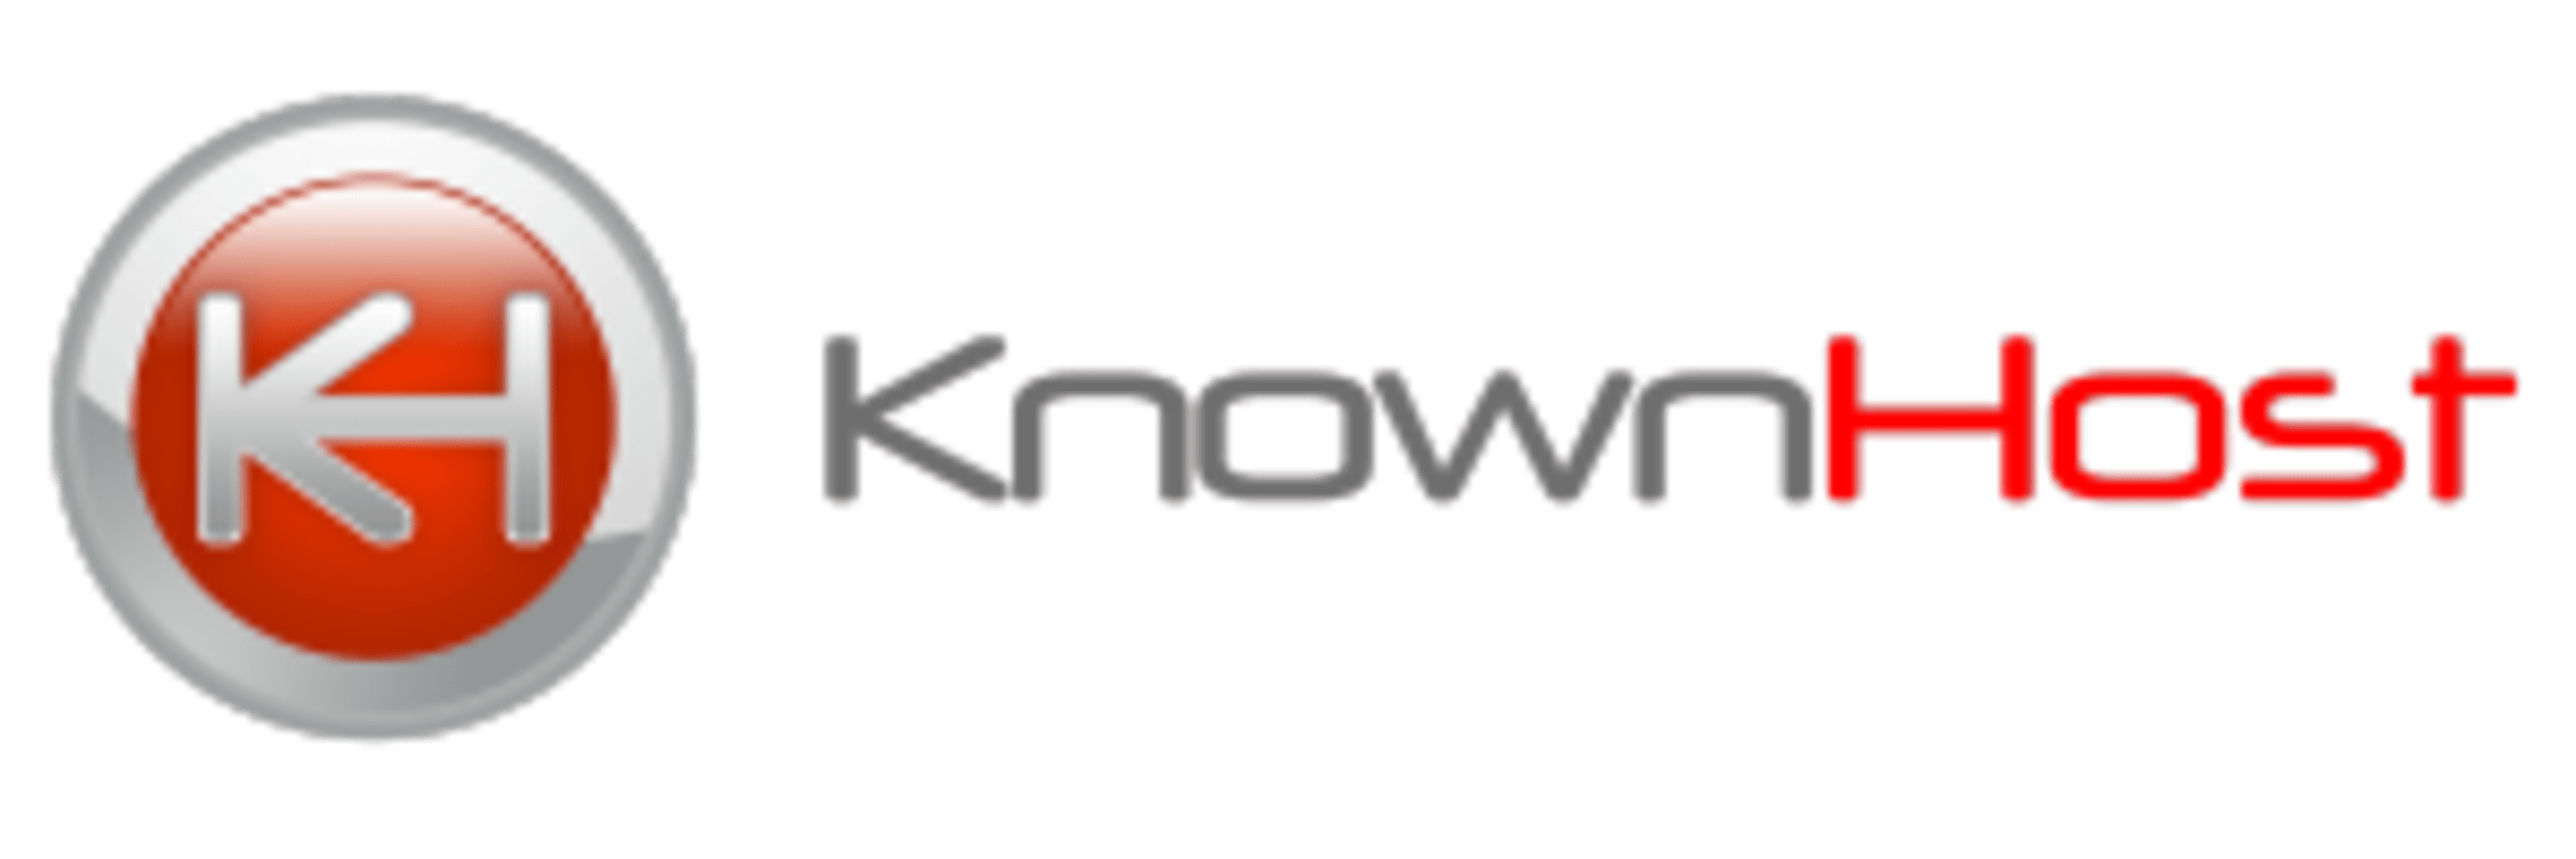 Knownhost Code